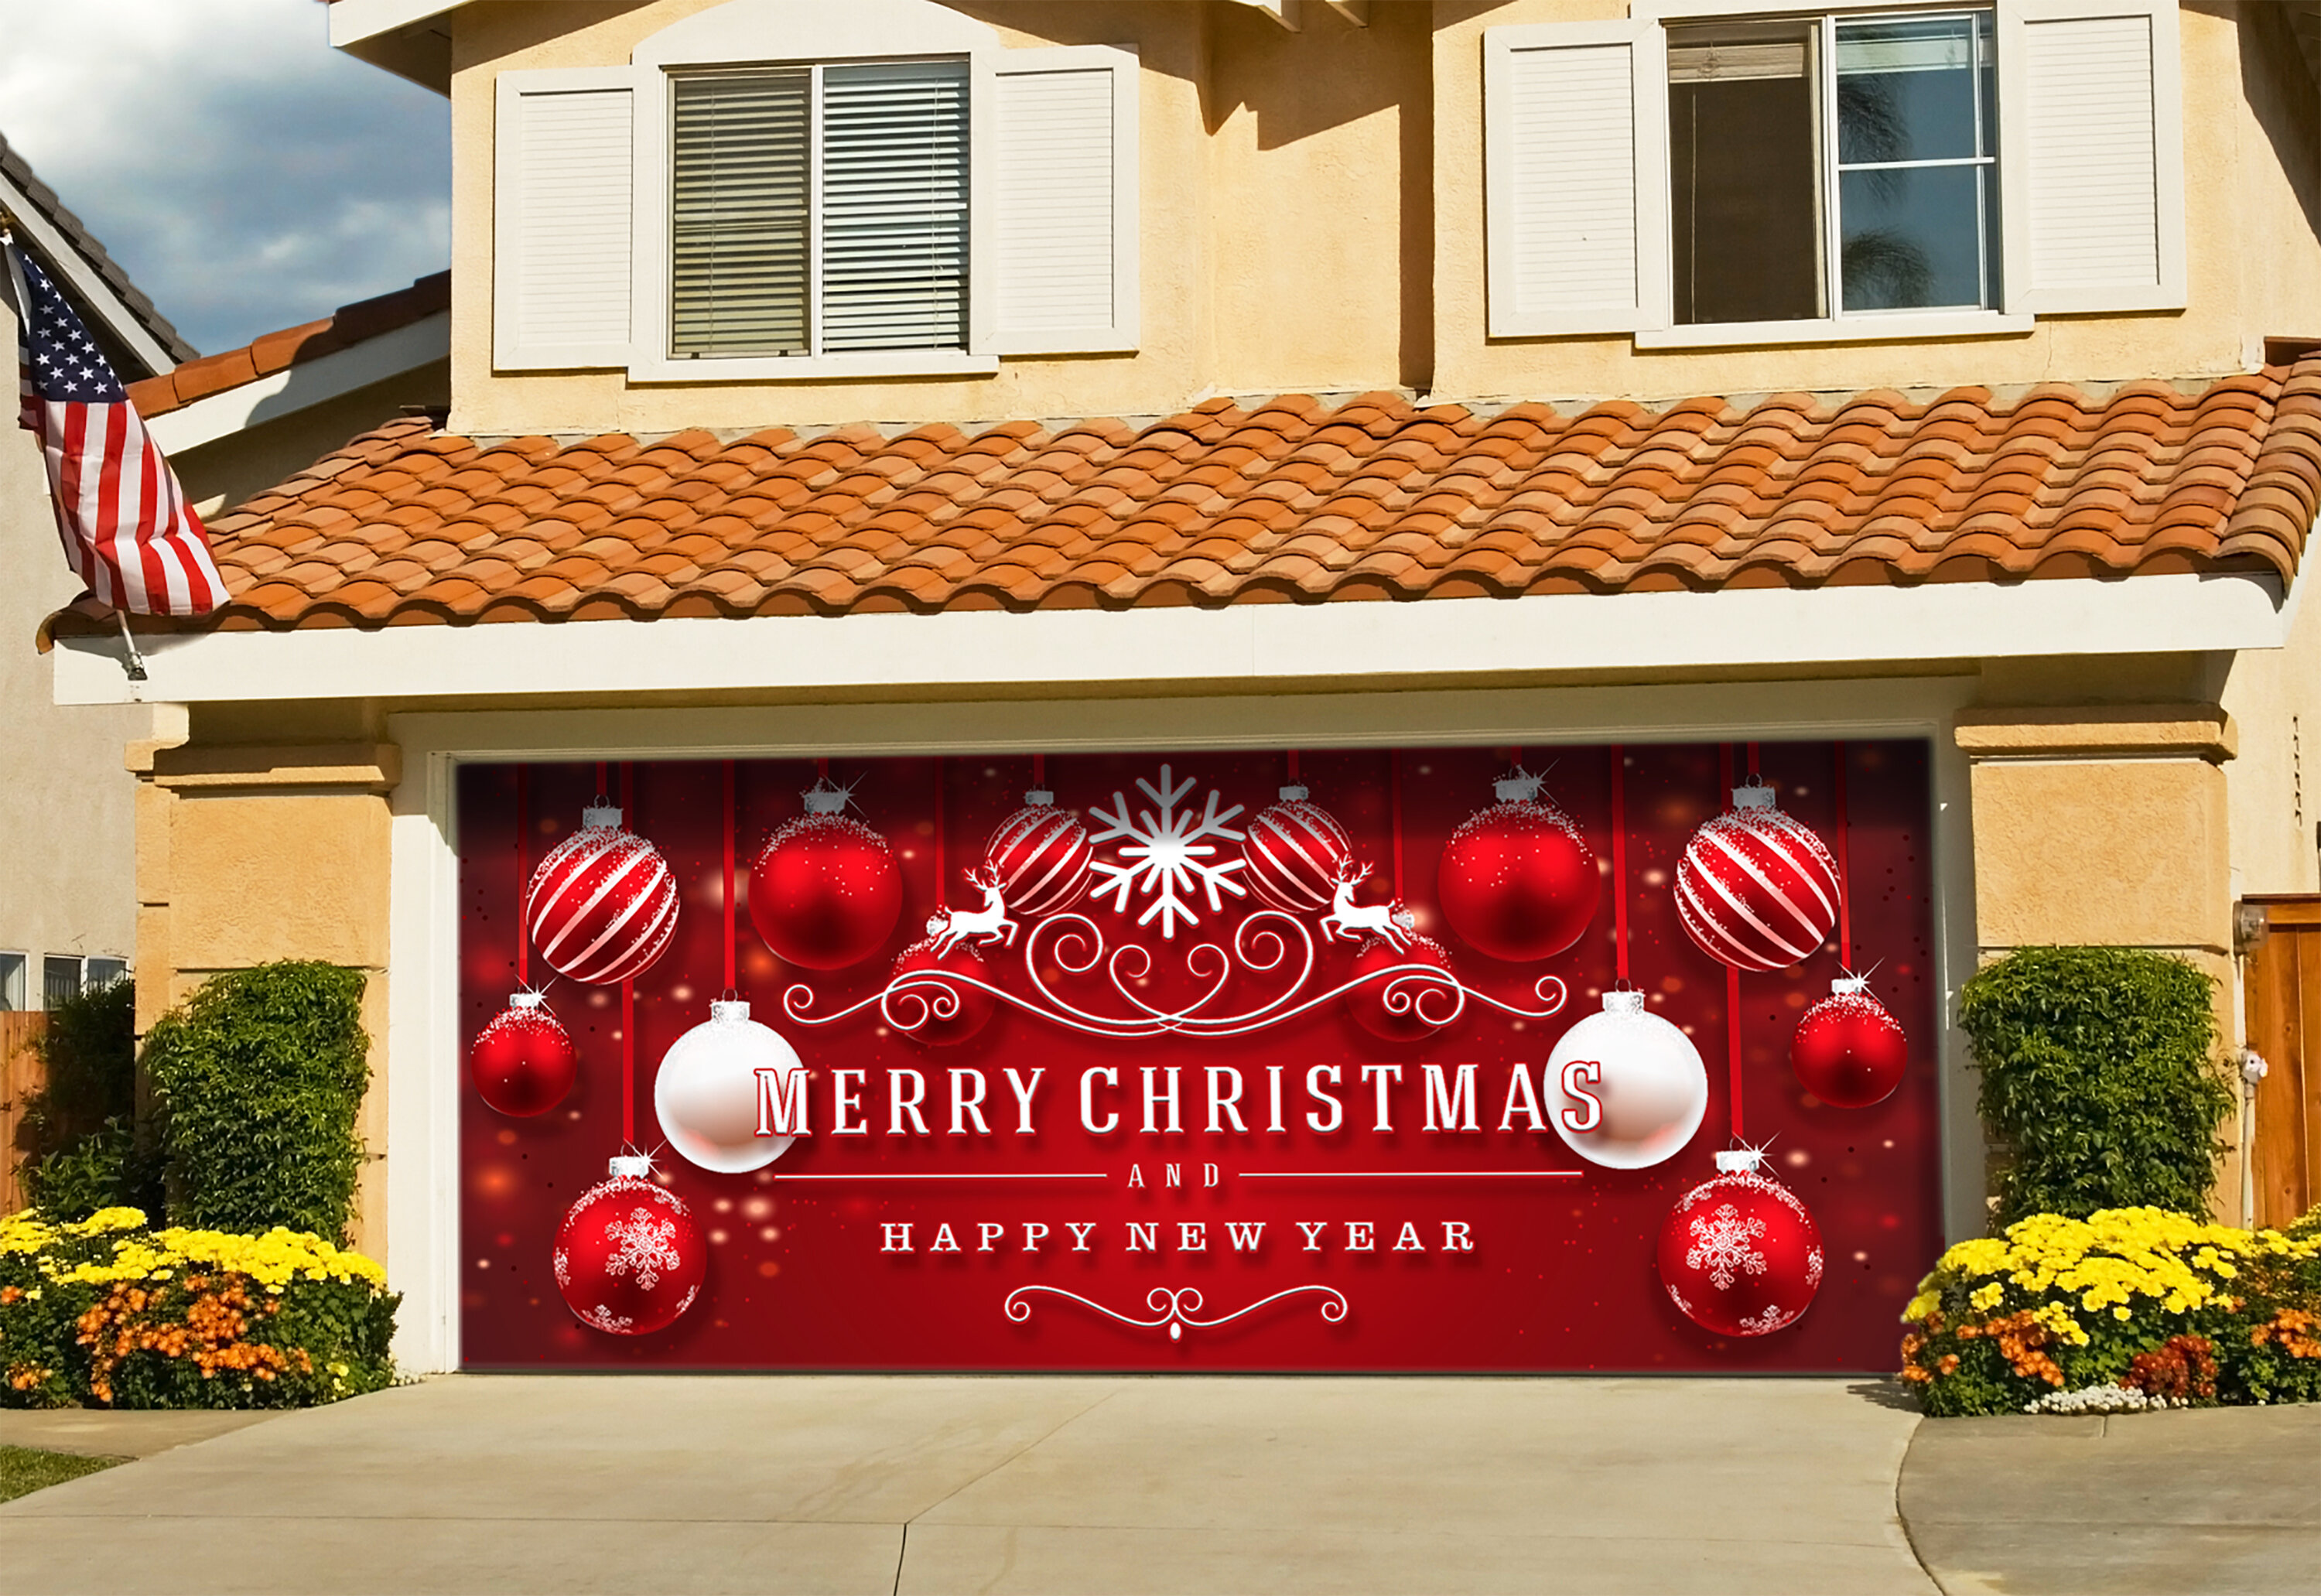 The Holiday Aisle® Ornaments in Snow Garage Door Mural & Reviews ...